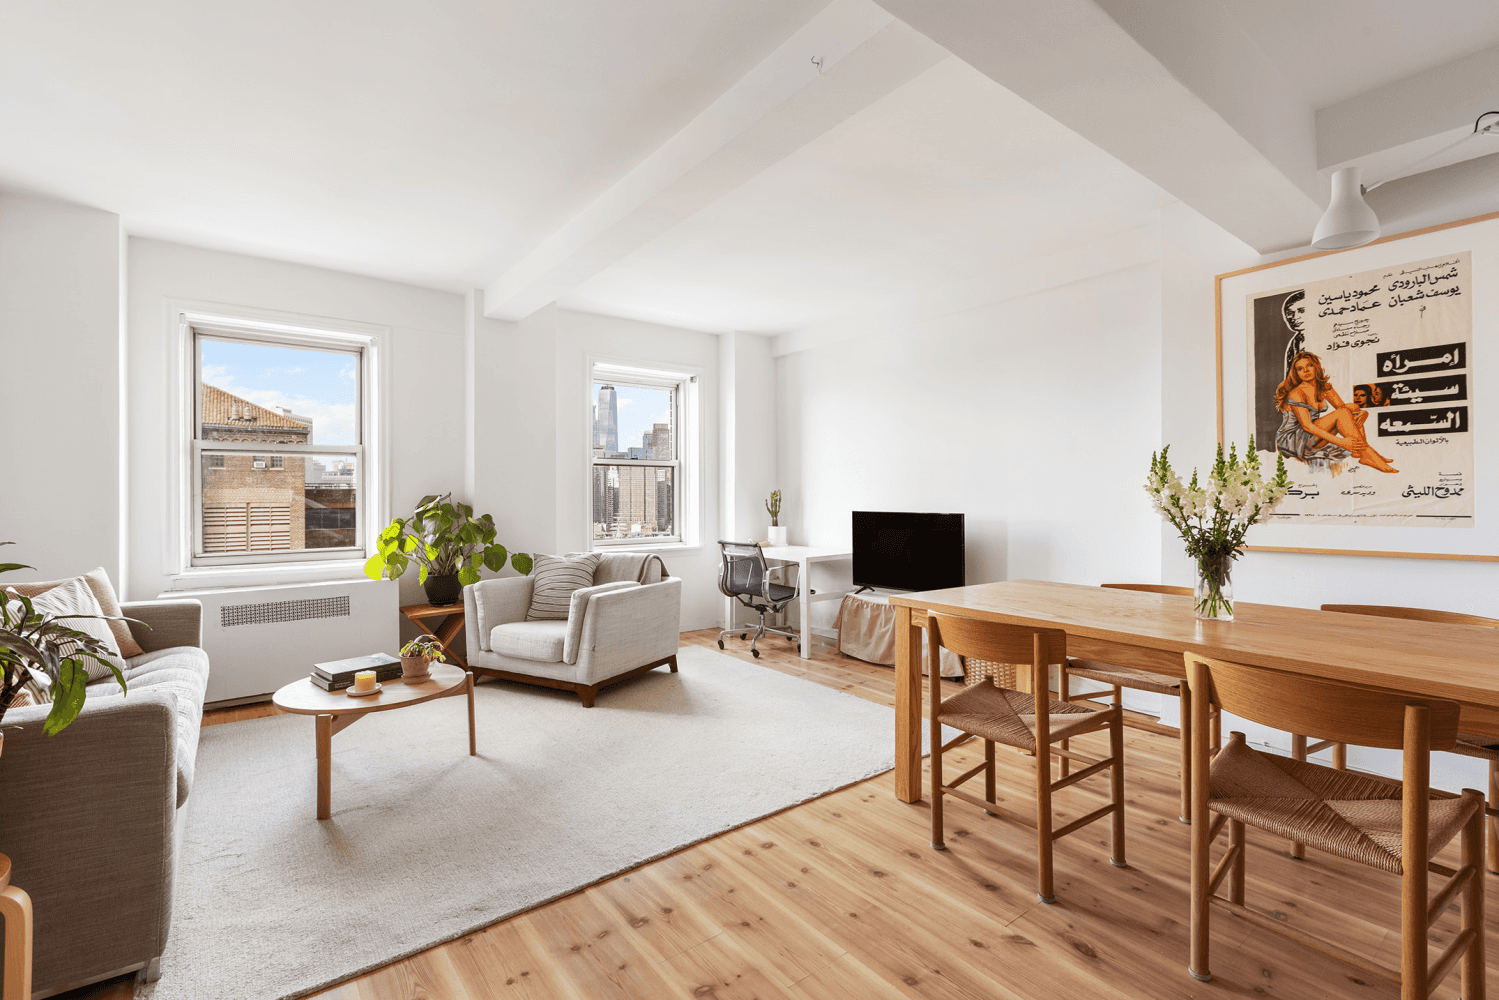 Welcome to this sun filled sanctuary in the heart of Brooklyn Heights, offering mesmerizing views of the Downtown Manhattan skyline and the Statue of Liberty.